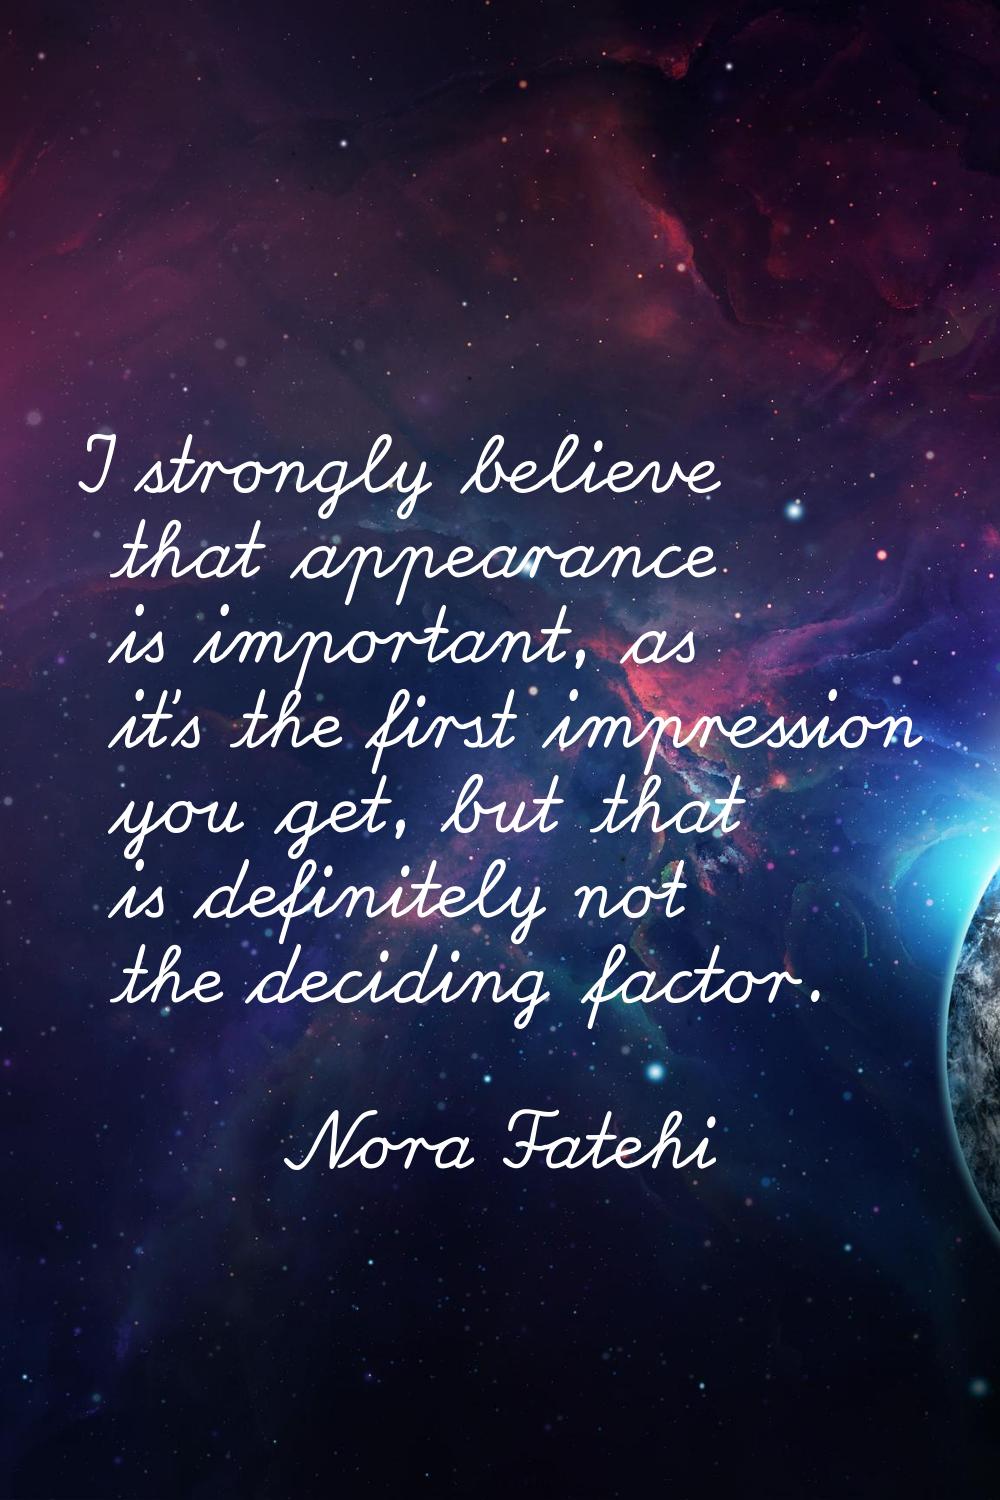 I strongly believe that appearance is important, as it's the first impression you get, but that is 